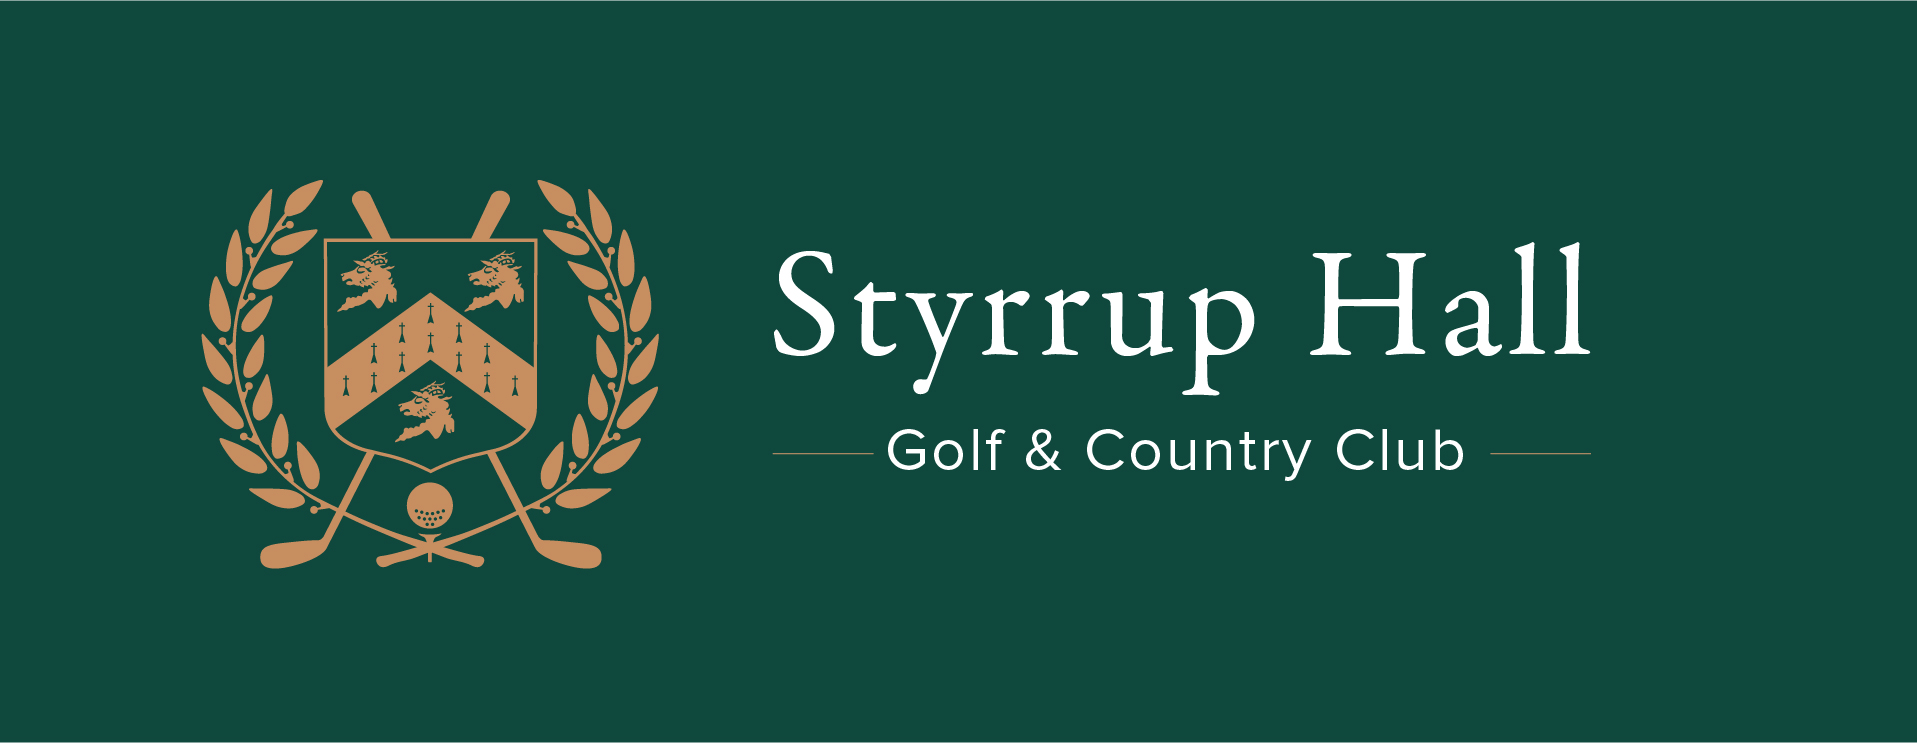 Styrrup Hall Golf and Country Club